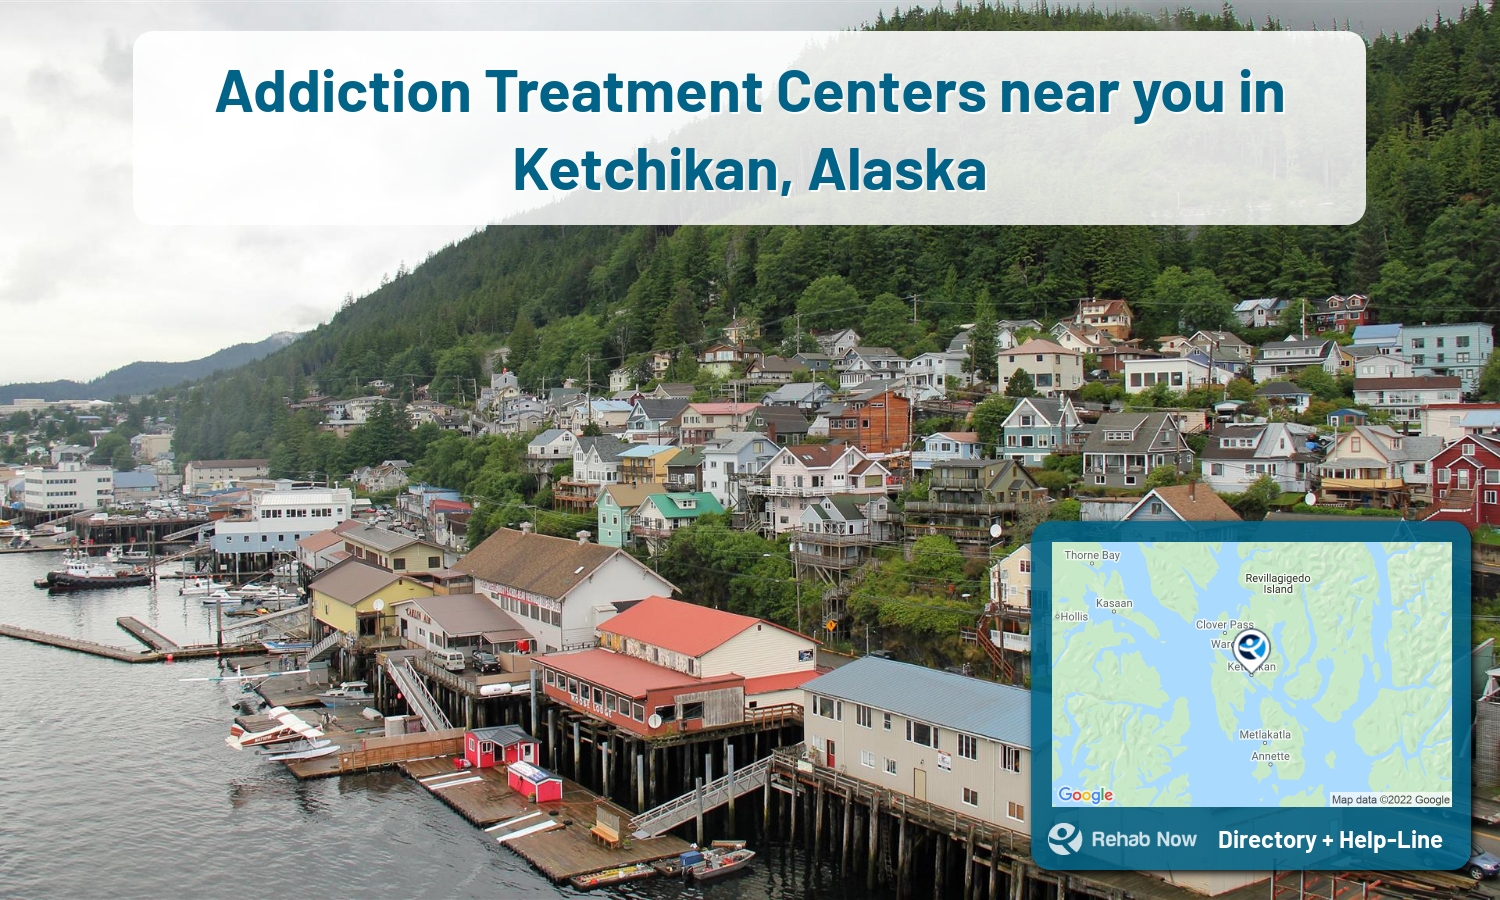 View options, availability, treatment methods, and more, for drug rehab and alcohol treatment in Ketchikan, Alaska